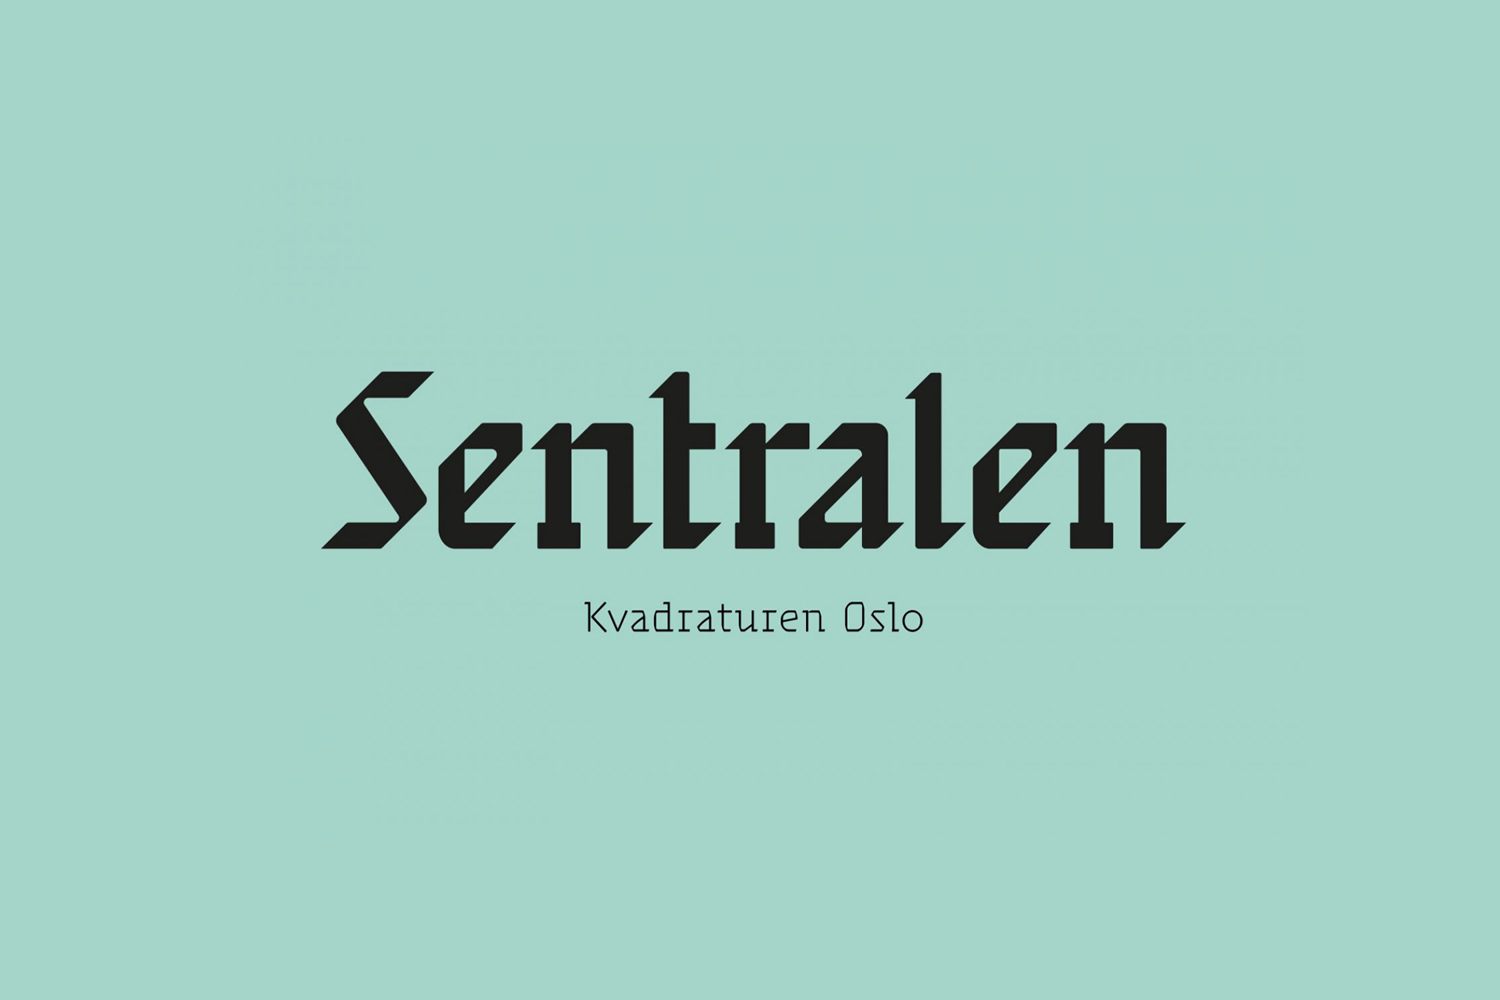 Brand identity and custom typography for Oslo-based cultural centre and co-working space Sentralen by Metric Design, Norway